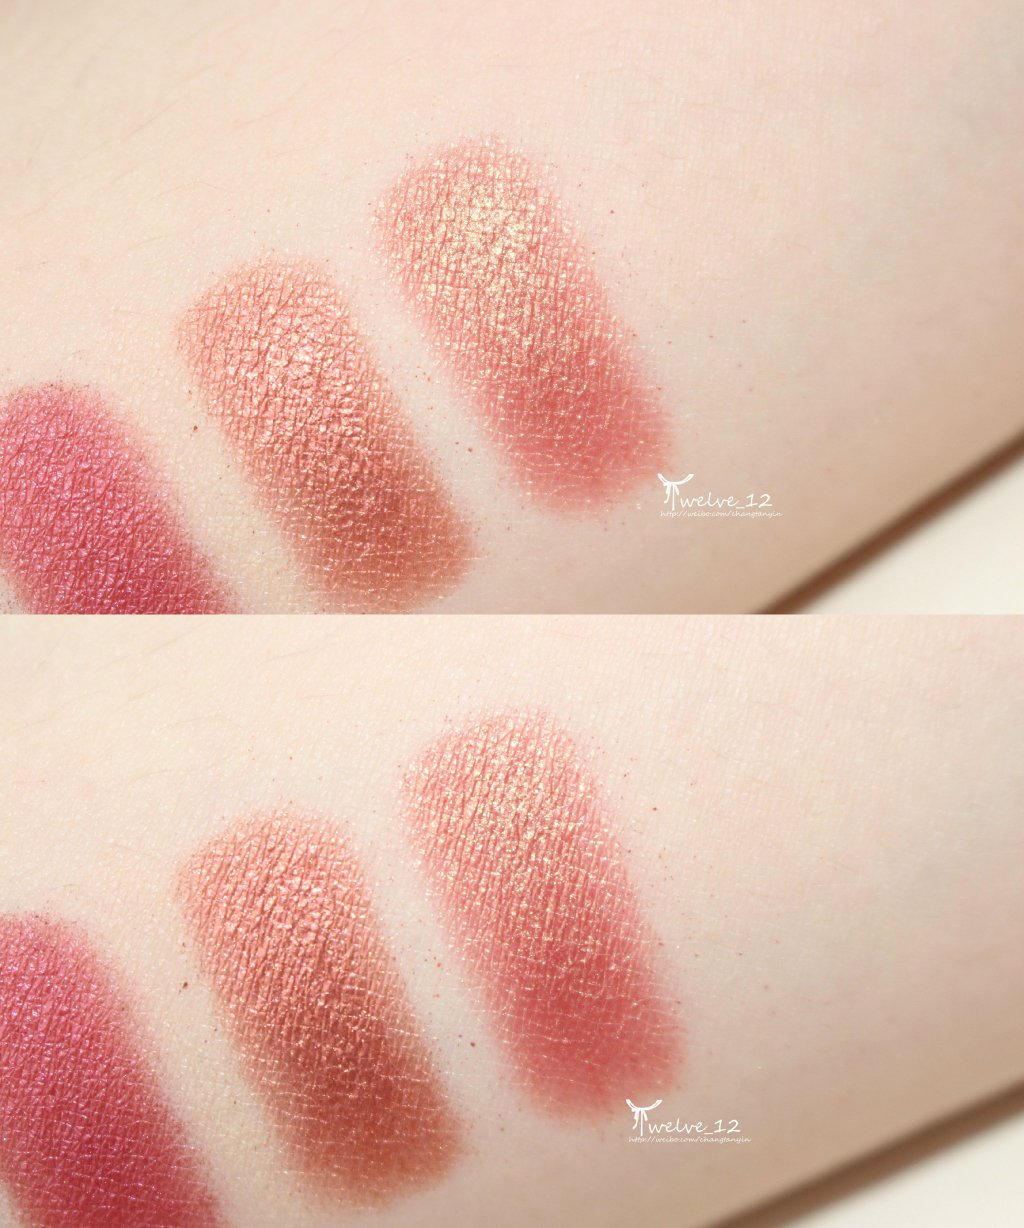 ETUDE HOUSE look at my eyes 爱丽单色眼影PK007、PK010(cafe)、RD302、RD304、RD305、BR410、BR417、GR706 ...